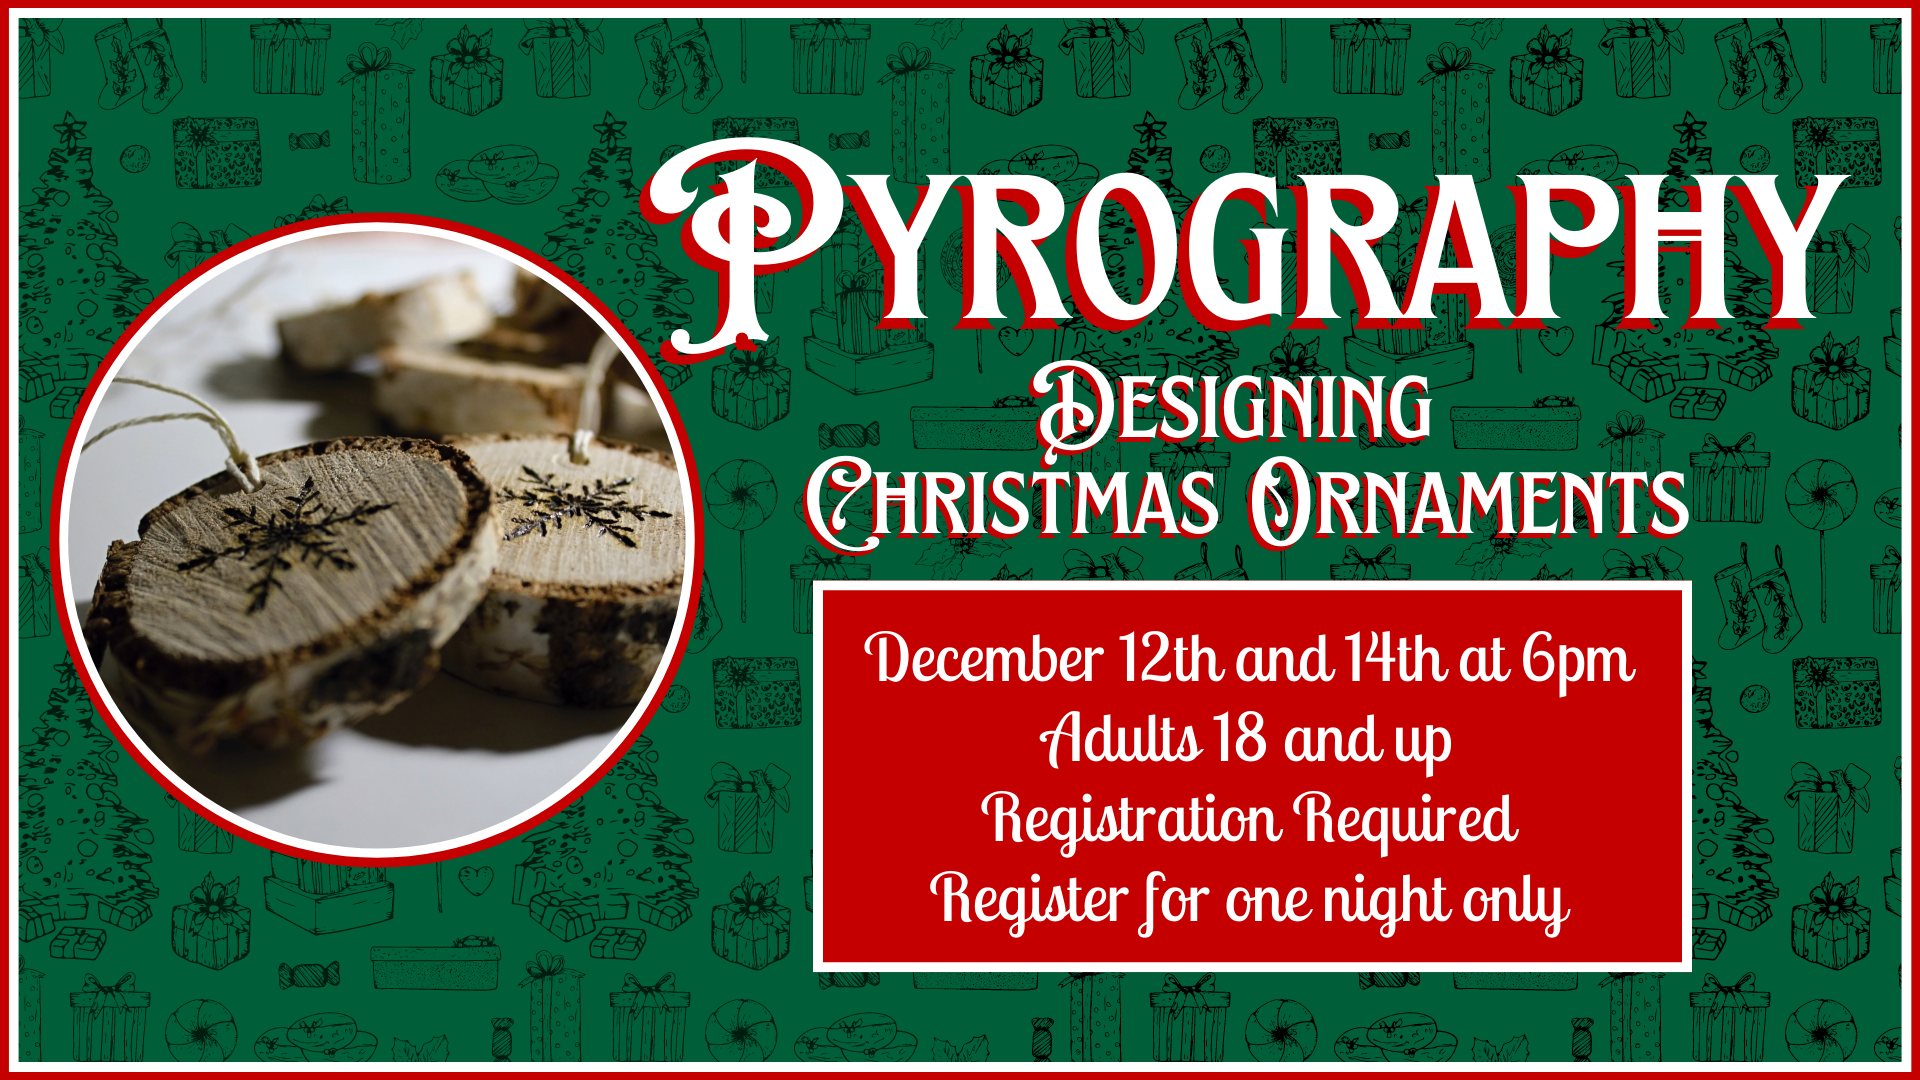 December 12th Pyrography Ornaments, Bronte Room 6pm, Adults only event